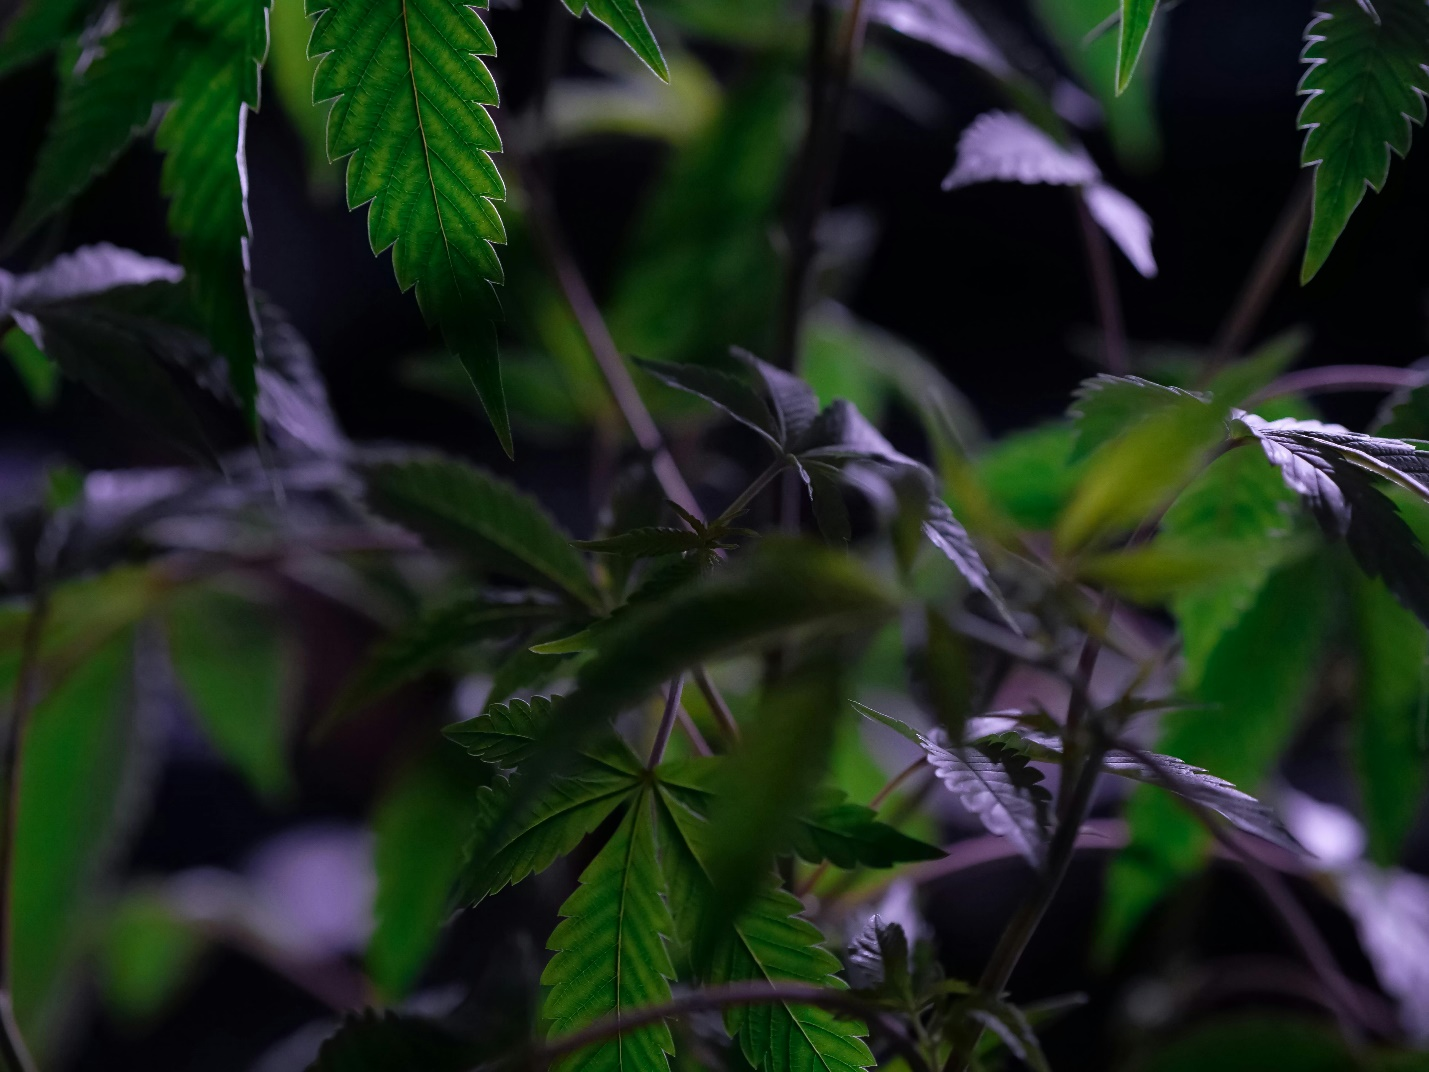 A close-up image of a cannabis plant, displaying its leaves and stems against a black background, highlighting the significance of cannabis in Vancouver.